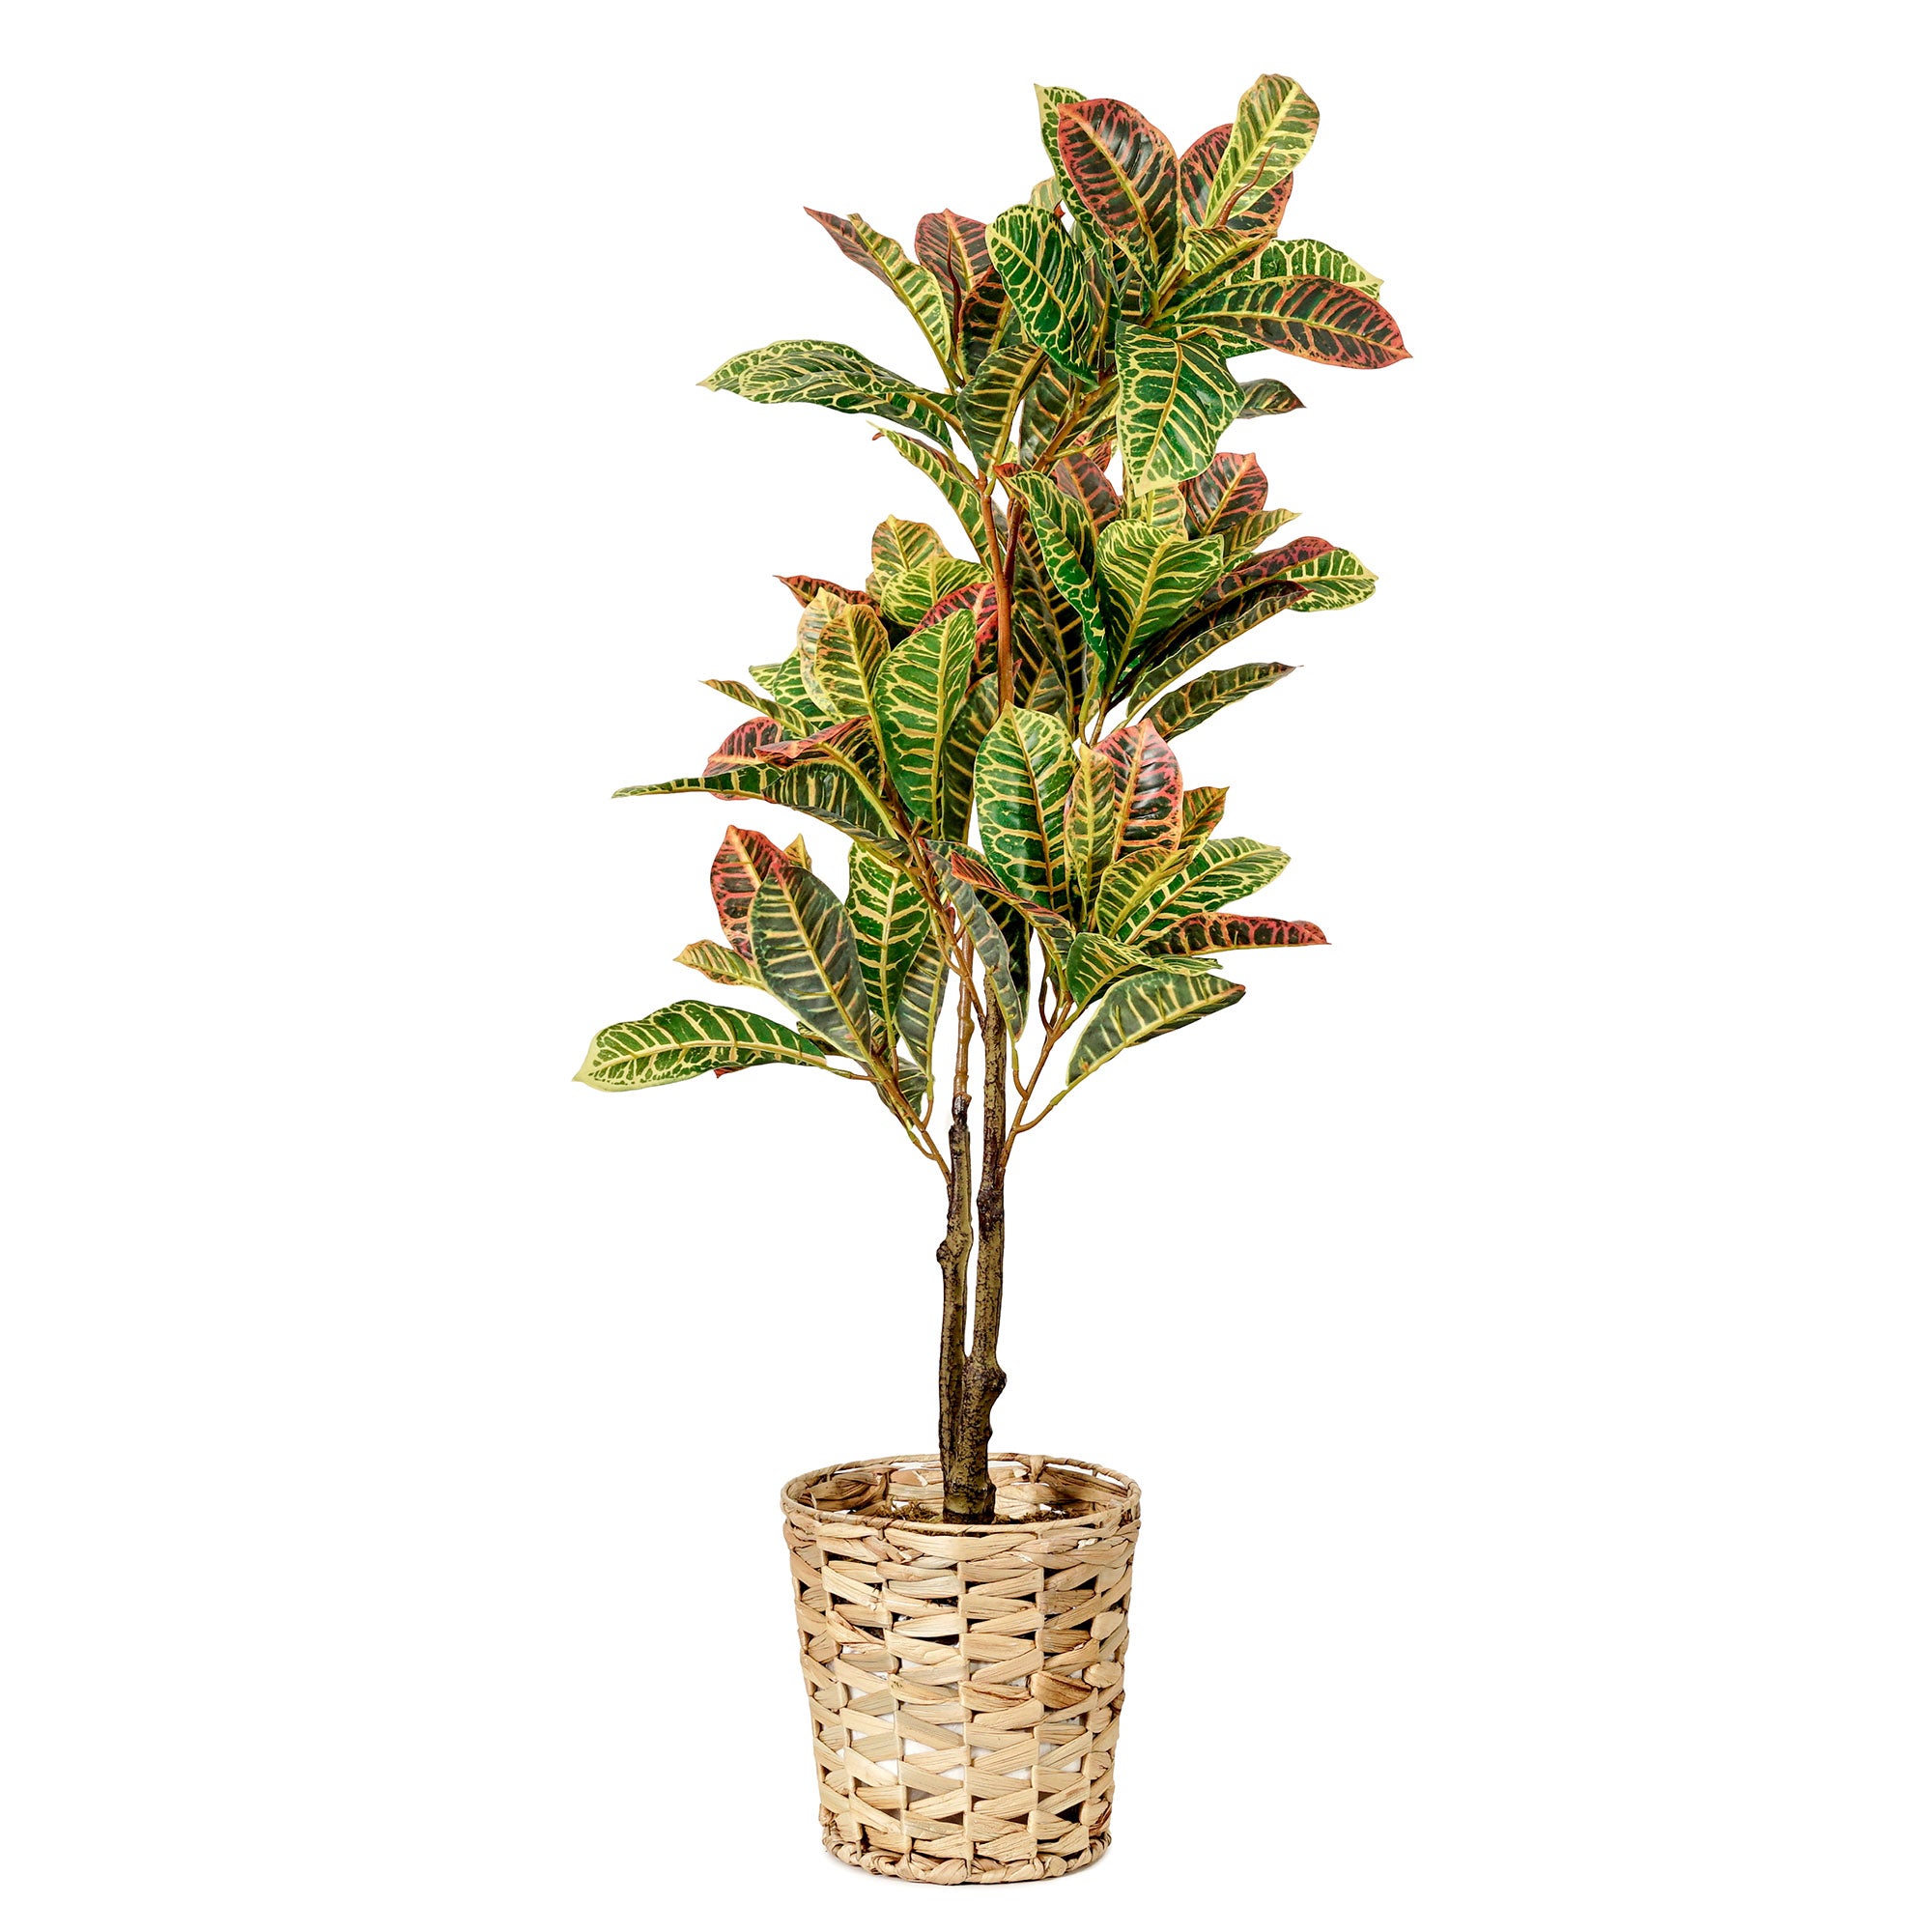 Artificial Croton Tree in Water Hyacinth Woven Basket - 48